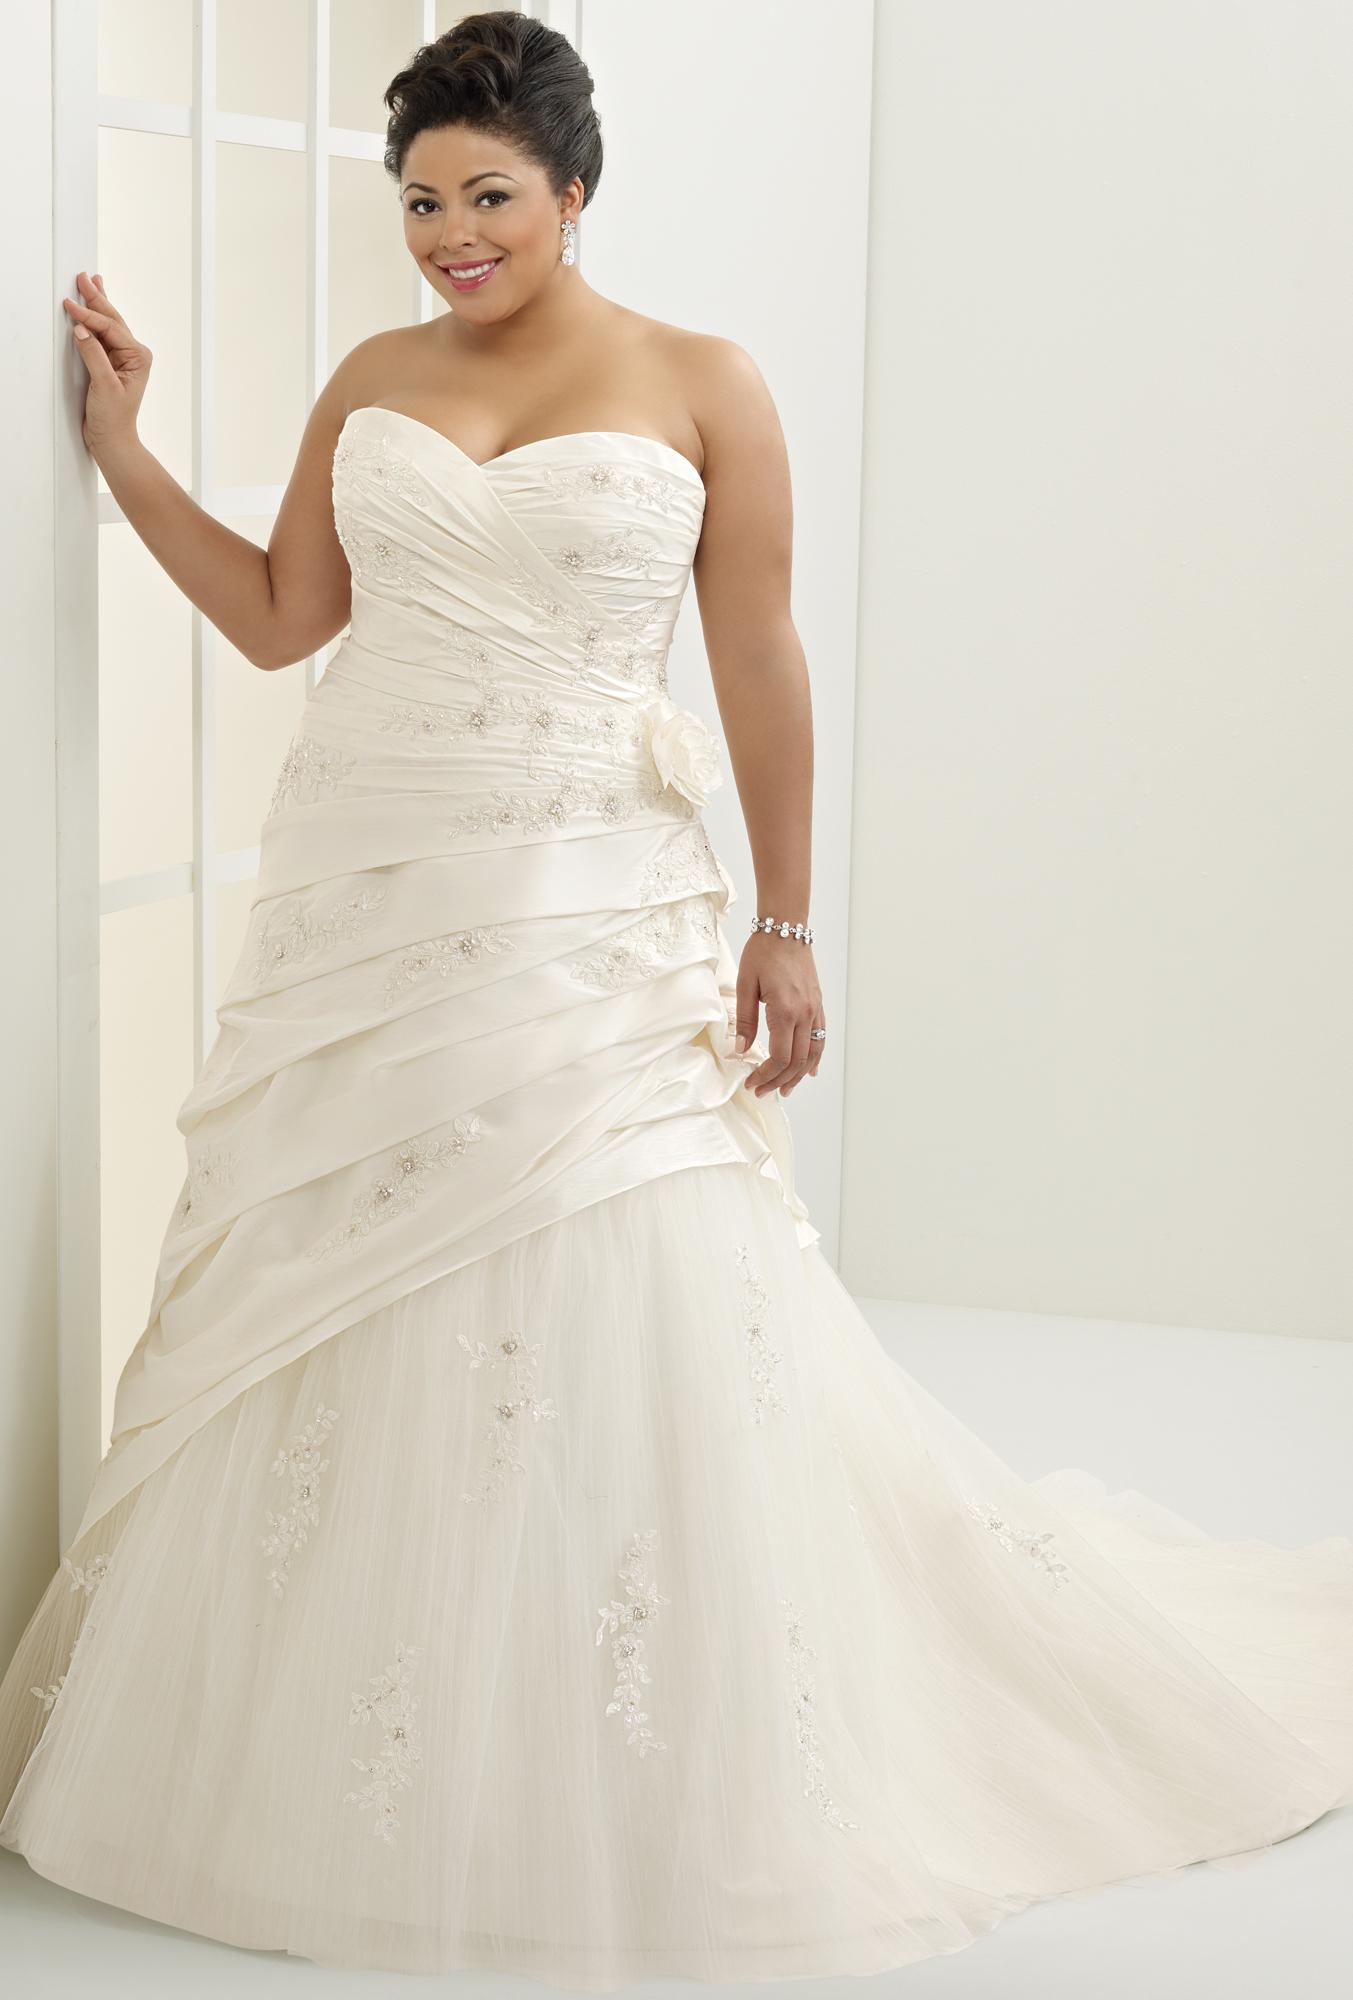 Top Burgundy Plus Size Wedding Dresses of all time Don t miss out 